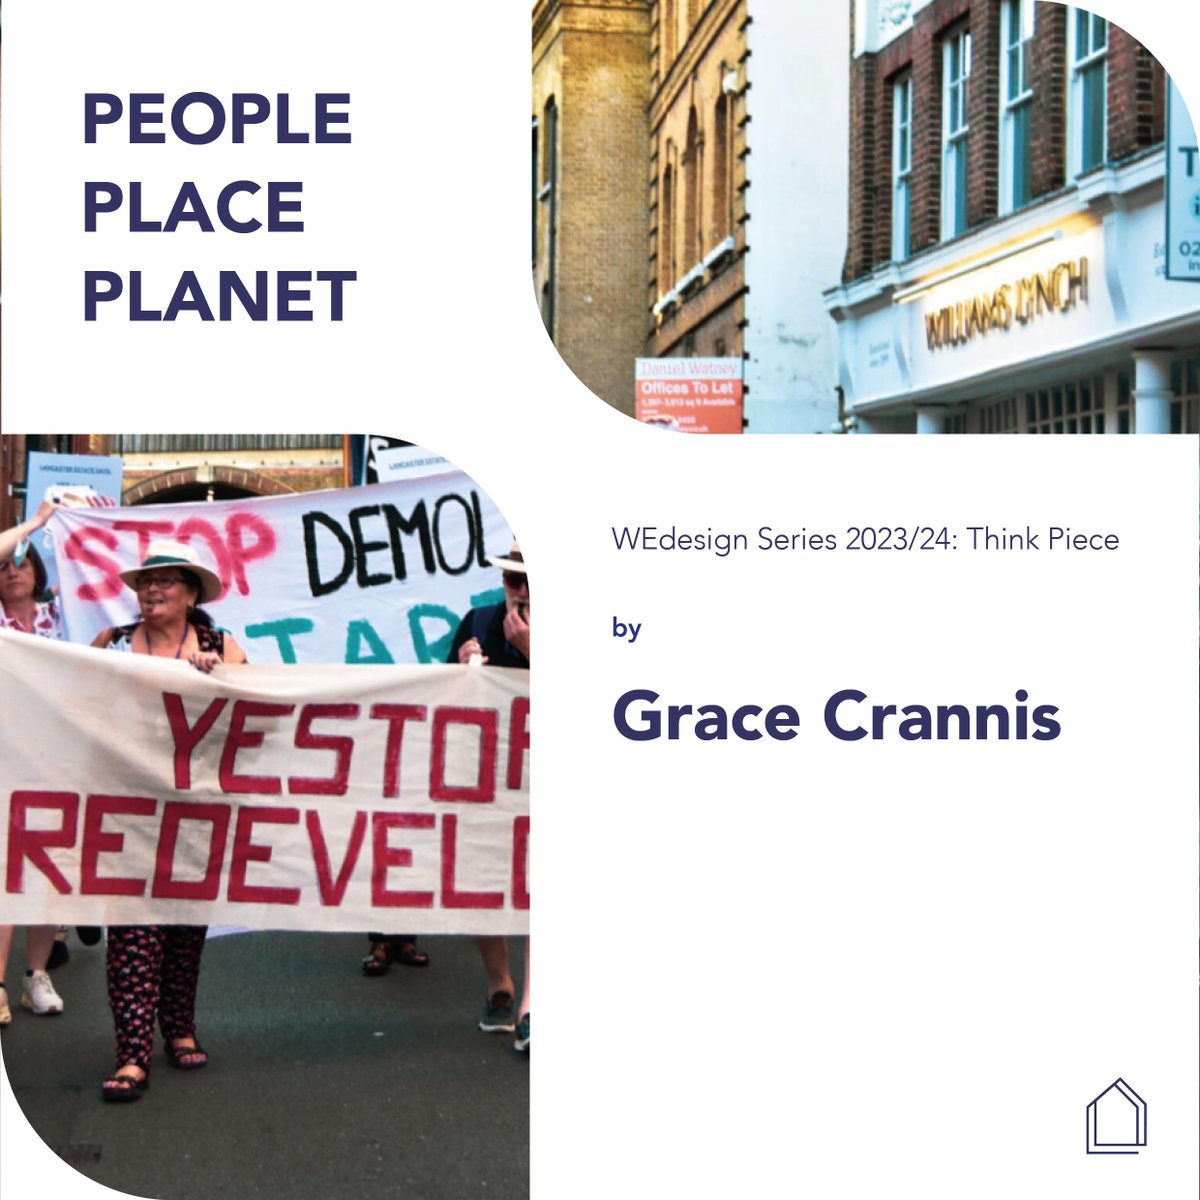 Today on the #GHblog, we're sharing the latest edition of our #WEdesign Think Pieces. This week @GraceCrannis shares her thoughts and ideas about the theme through the lens of leadership and accountability in placemaking. theglasshouse.org.uk/blog-series/ev…